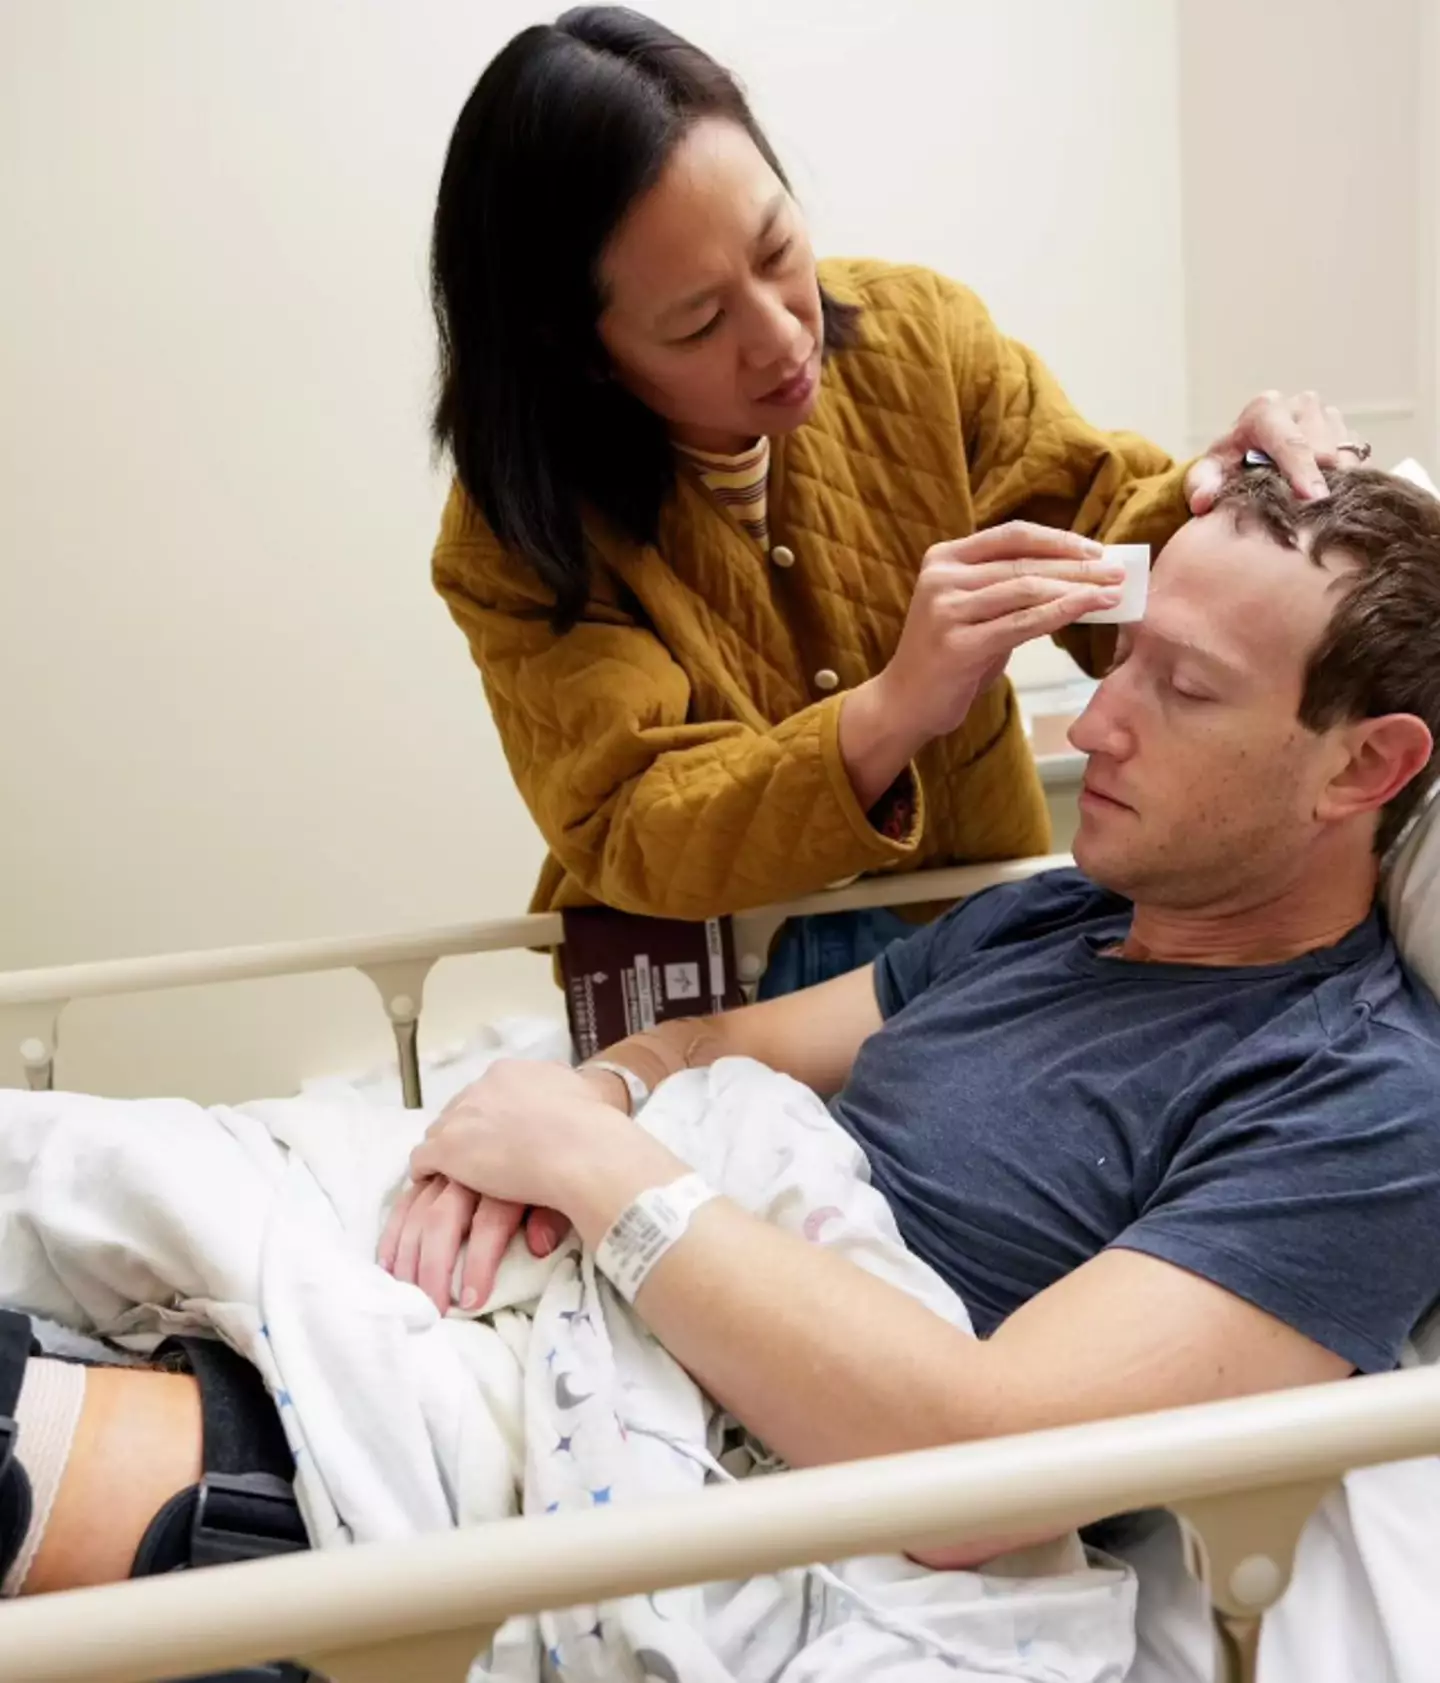 Zuckerberg's wife tended to him while he was in hospital.